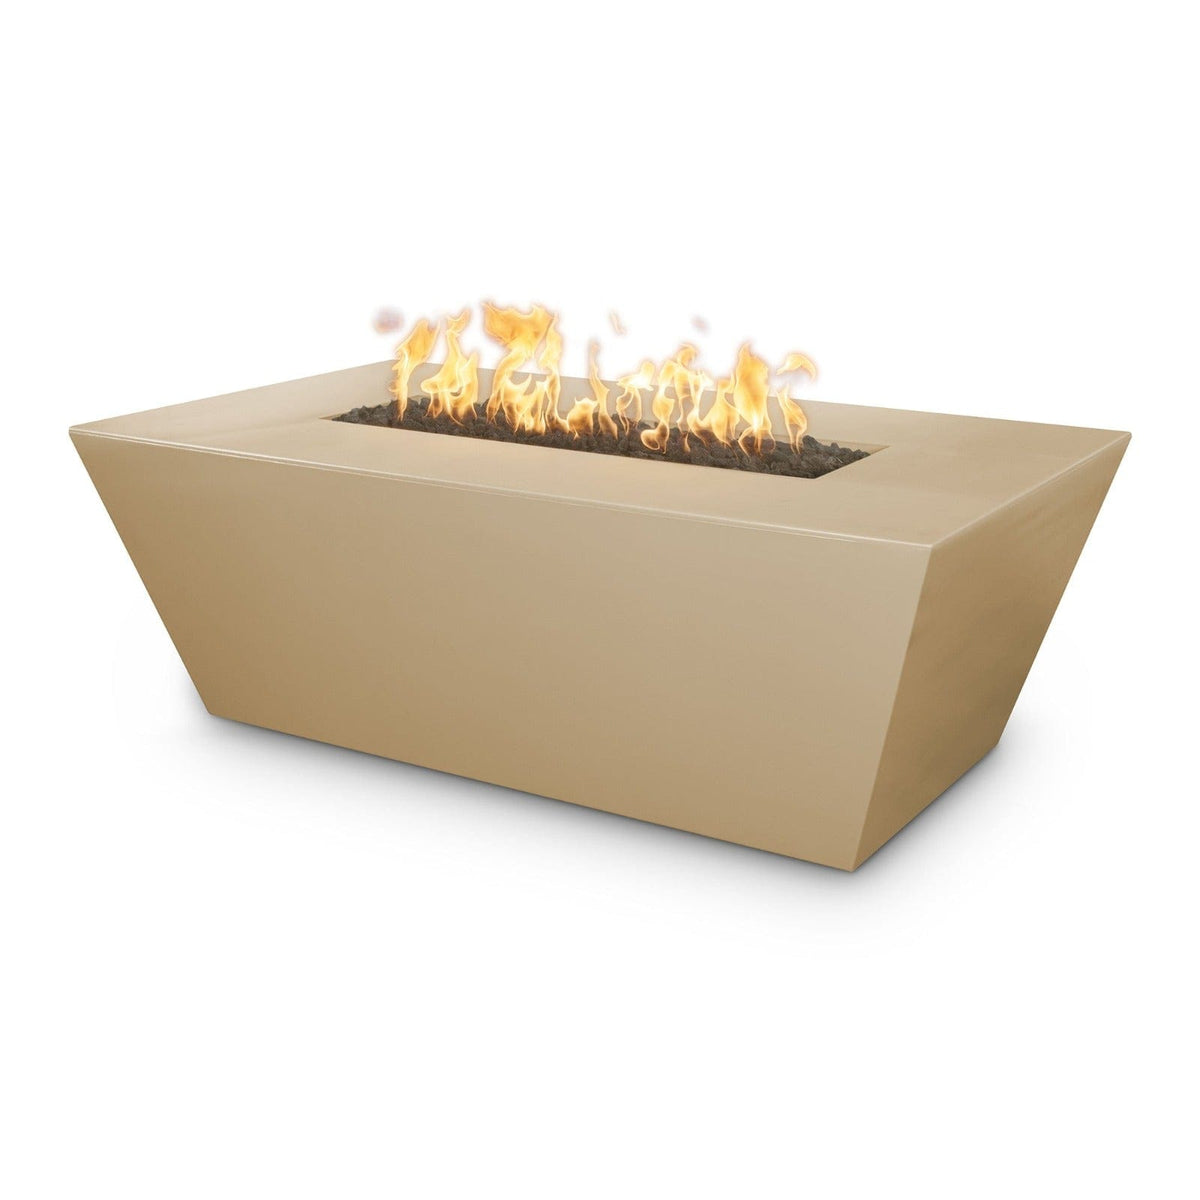 The Outdoor Plus Fire Features Brown (-BRN) / Match Lit Ignition / Liquid Propane The Outdoor Plus 60&quot; Rectangular Angelus Fire Pit in Solid Concrete Finishes - GFRC Concrete / OPT-AGLGF60, OPT-AGLGF60FSML, OPT-AGLGF60FSEN, OPT-AGLGF60E12V, OPT-AGLGF60EKIT